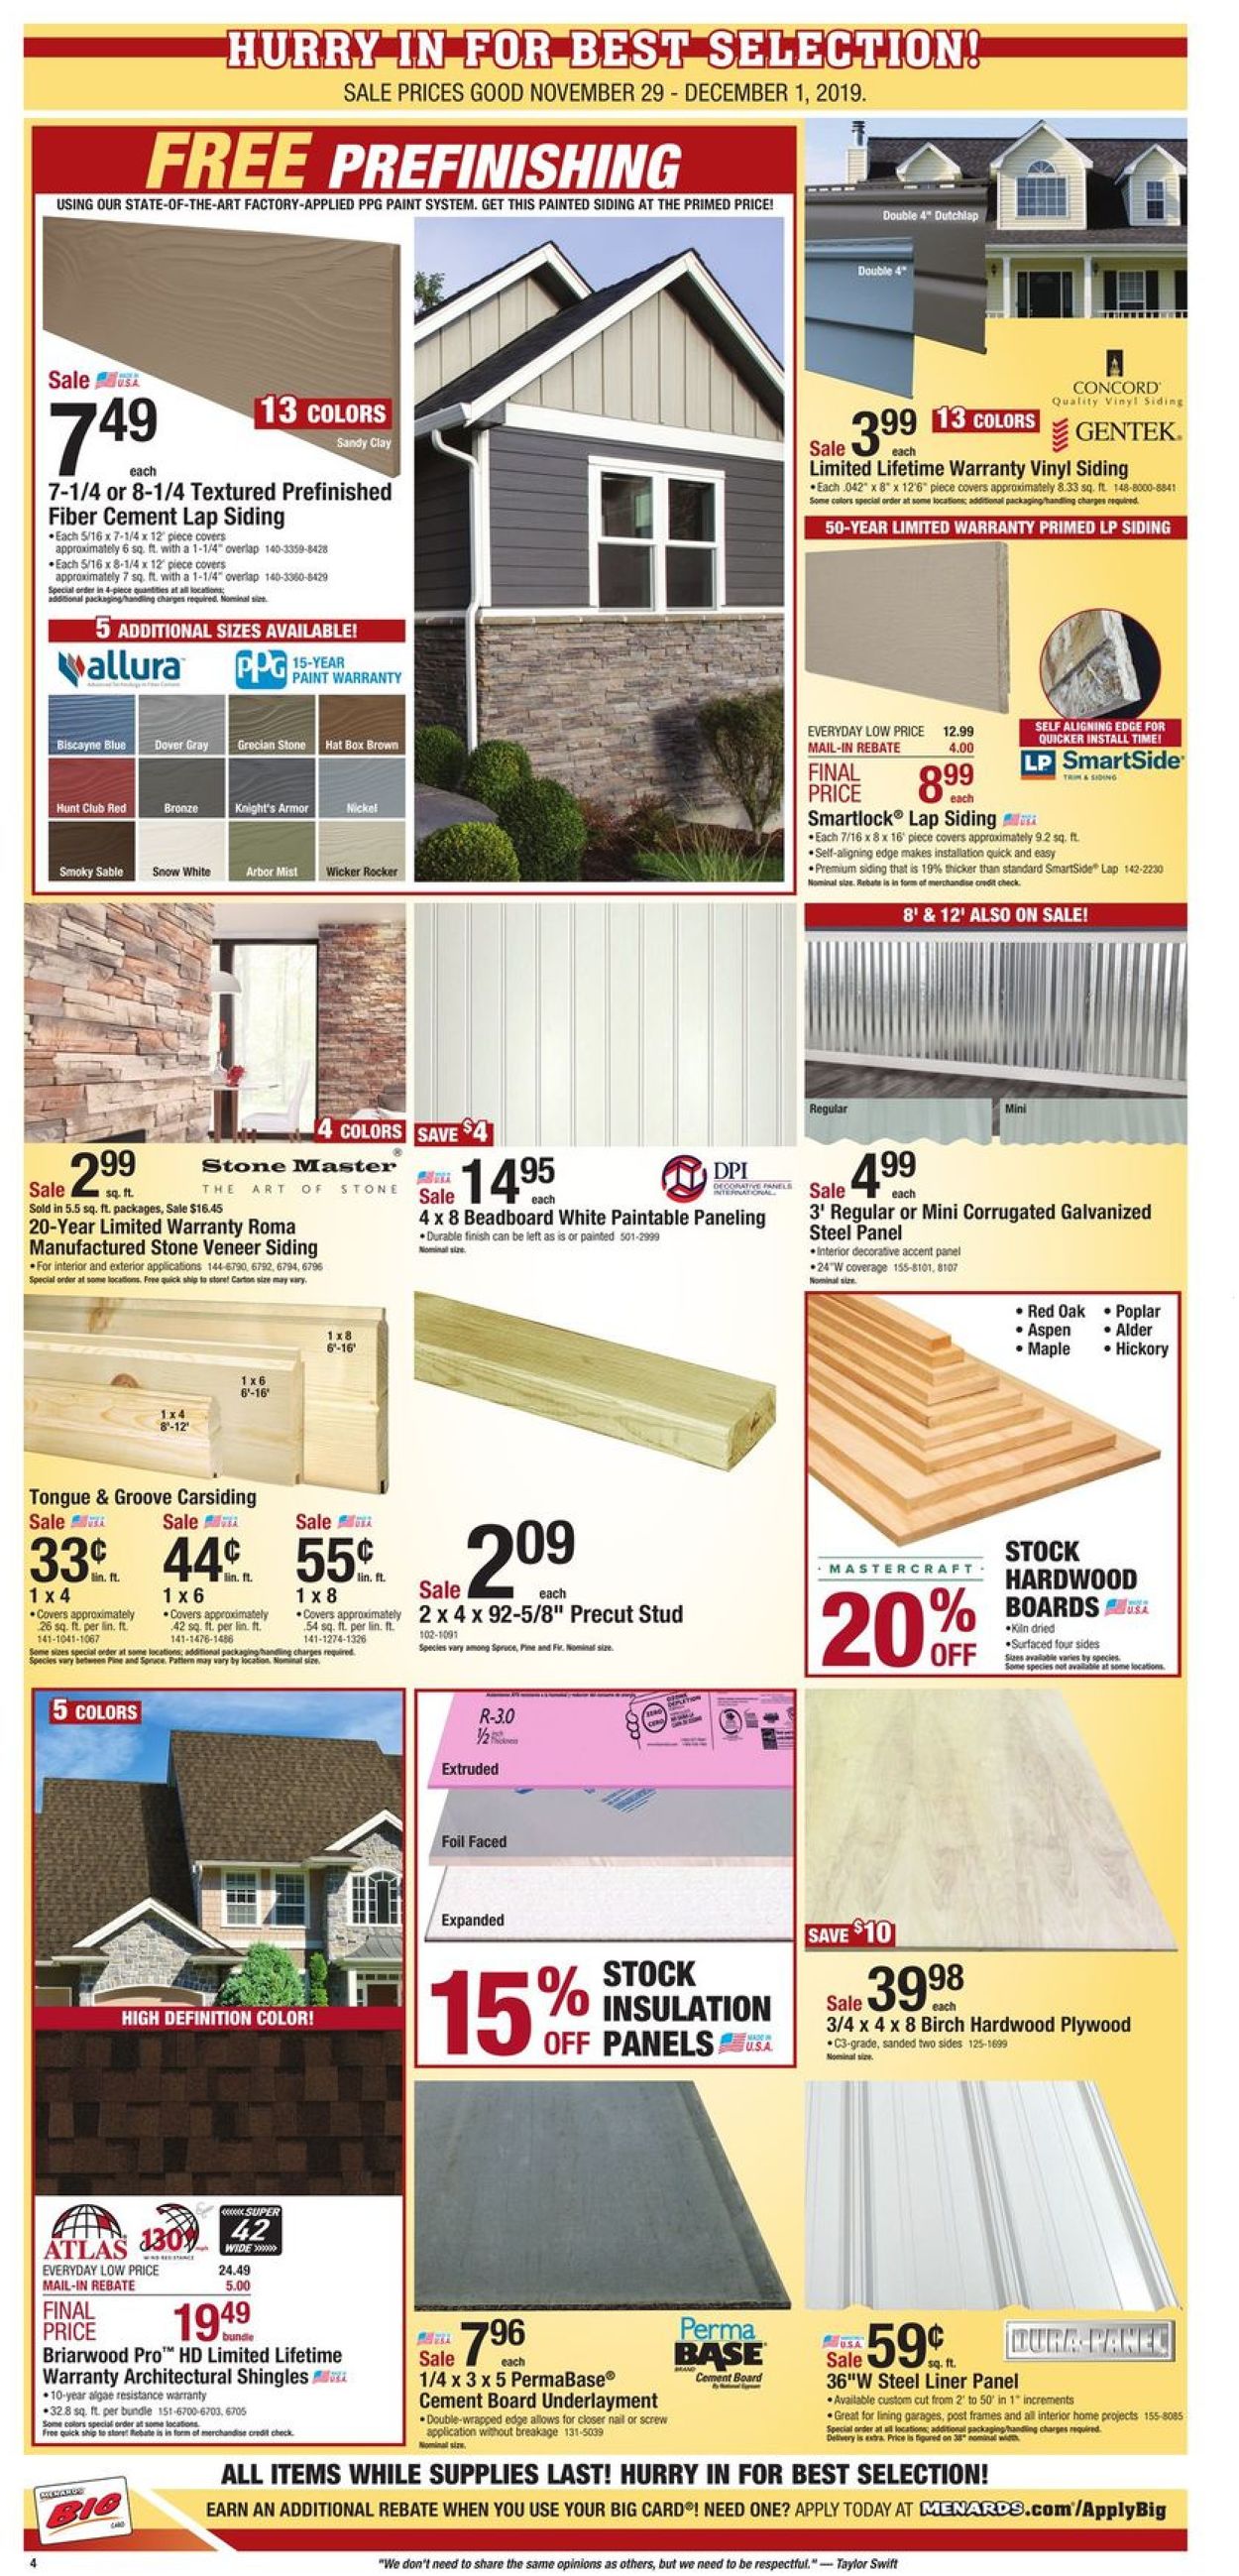 Menards - Black Friday Sale 2019 Current weekly ad 11/29 - 12/01/2019 [4] - mediakits.theygsgroup.com